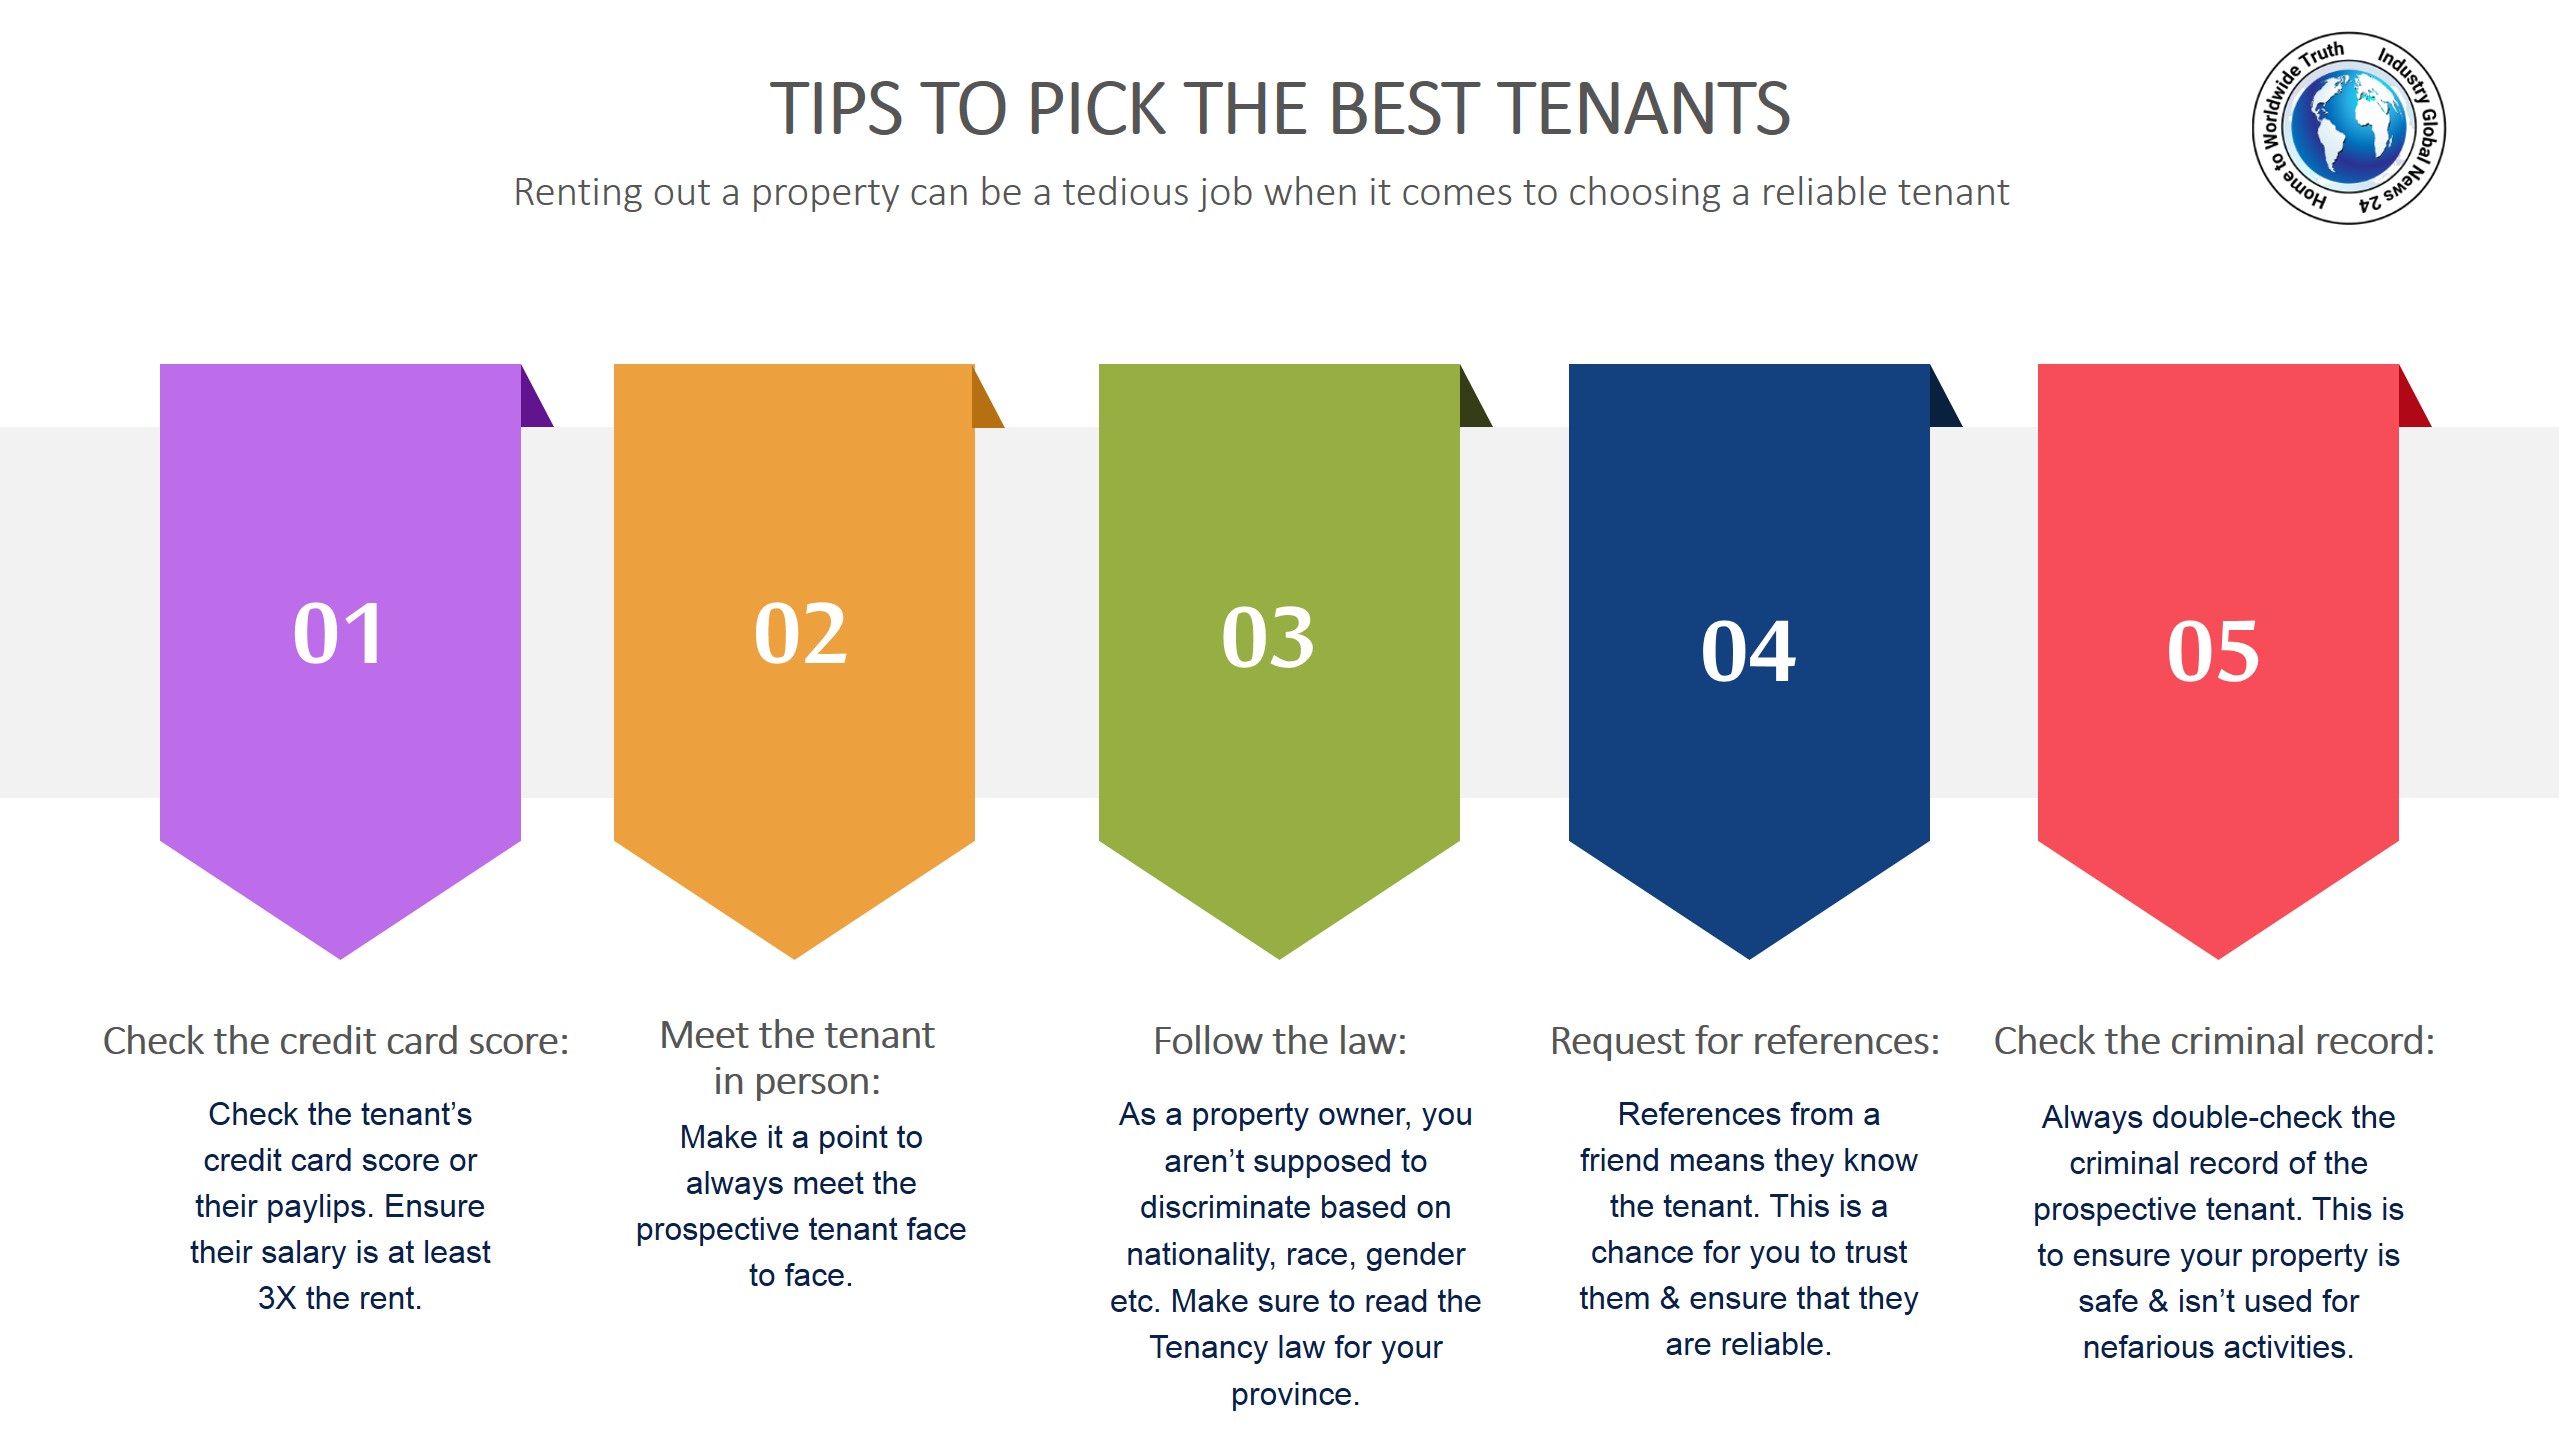 Tips to pick the best tenants